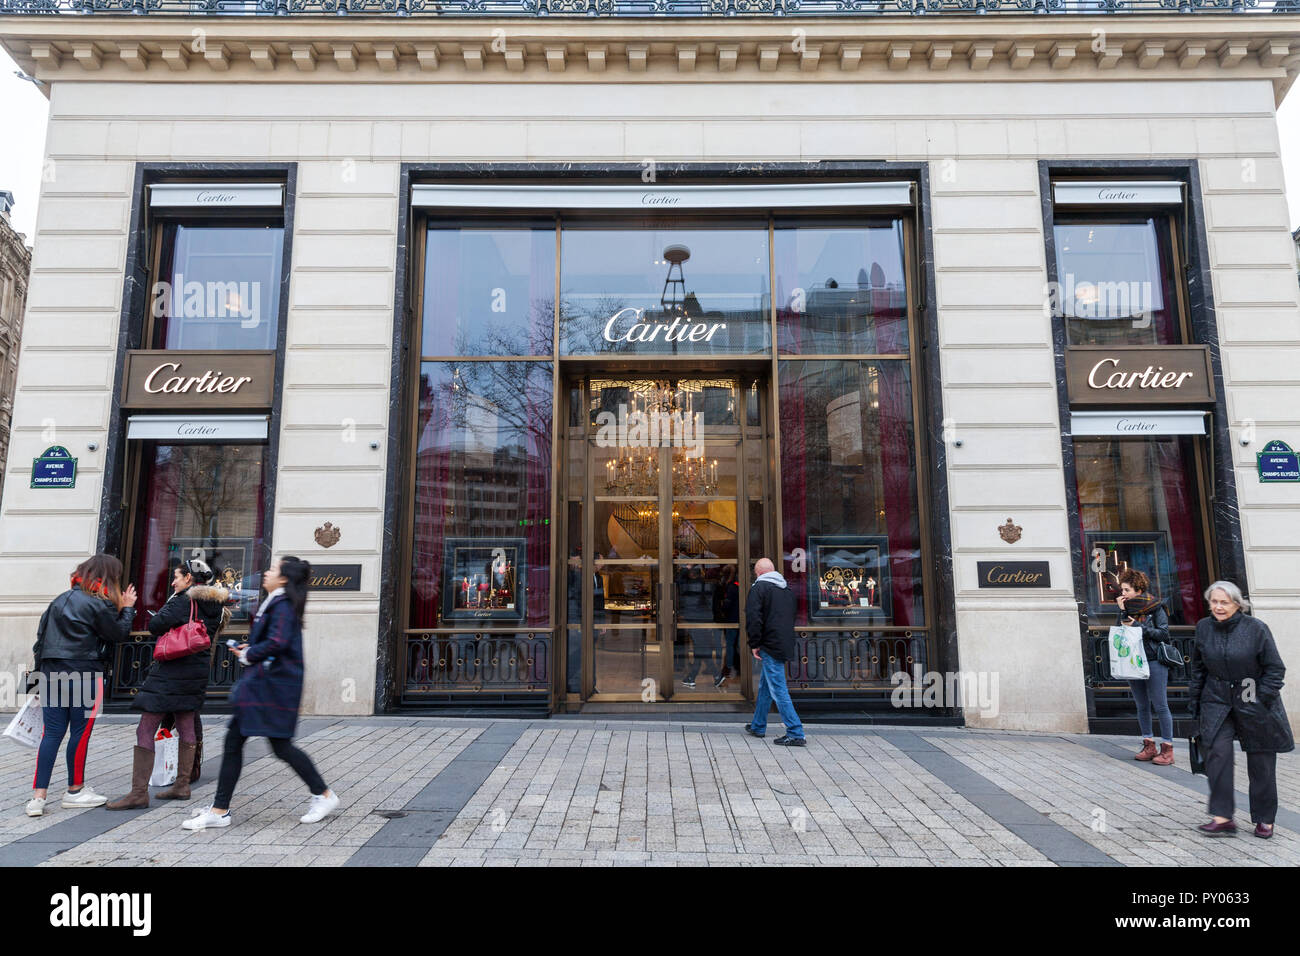 PARIS, FRANCE - MARCH 30, 2011: Detail of Chanel shop on Champs-Elysees in  Paris Stock Photo - Alamy